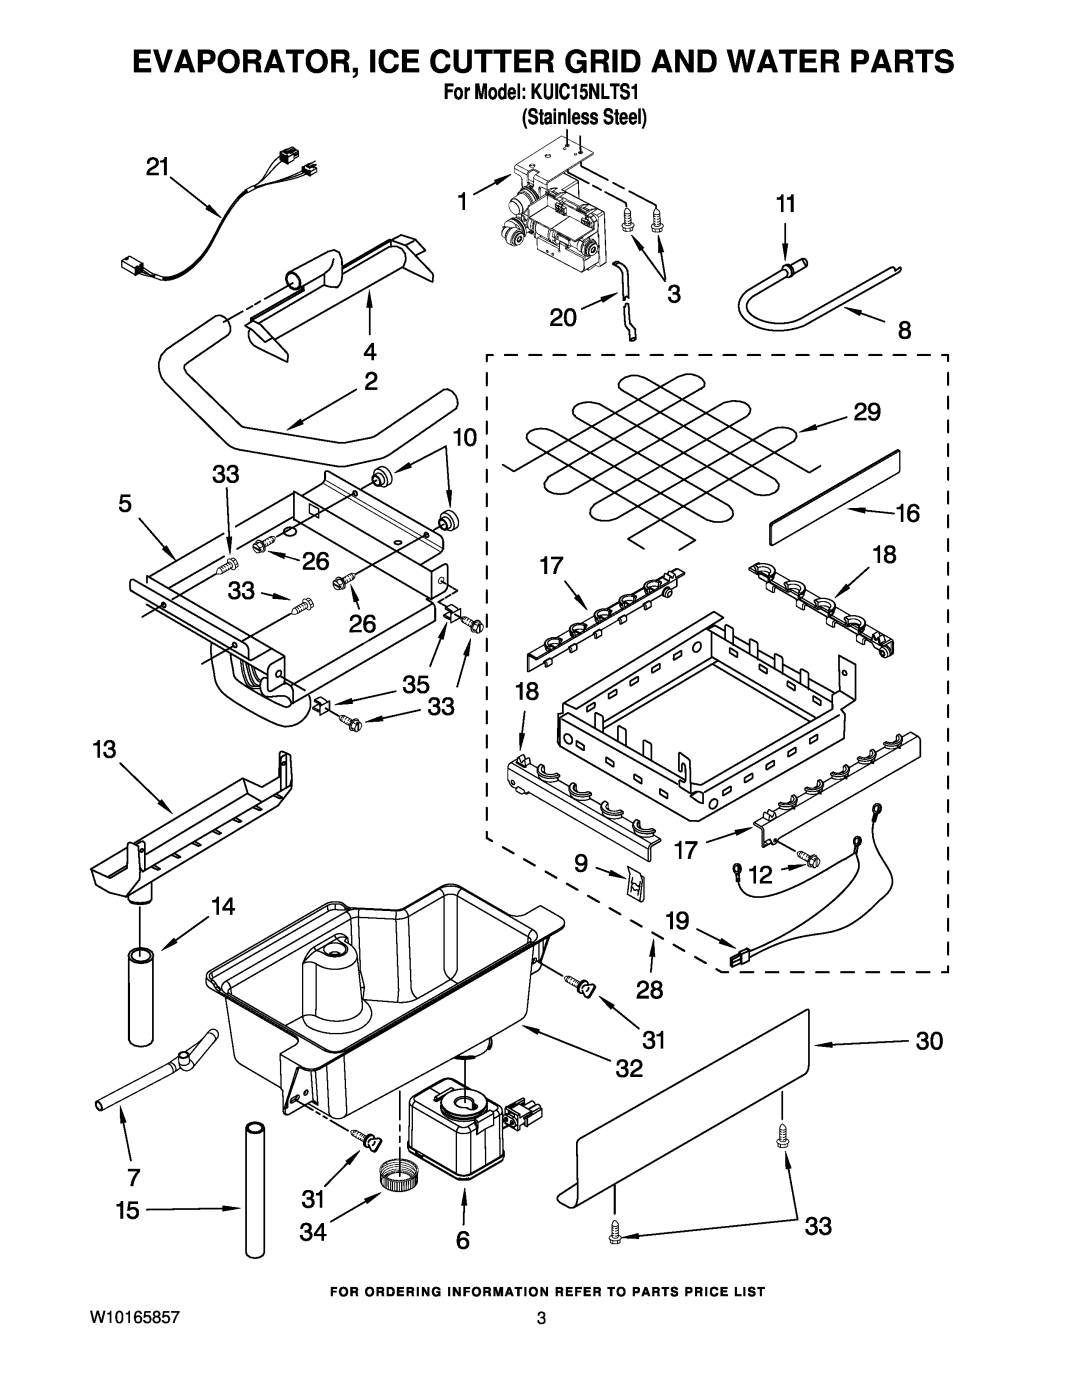 KitchenAid manual Evaporator, Ice Cutter Grid And Water Parts, W10165857, For Model KUIC15NLTS1 Stainless Steel 